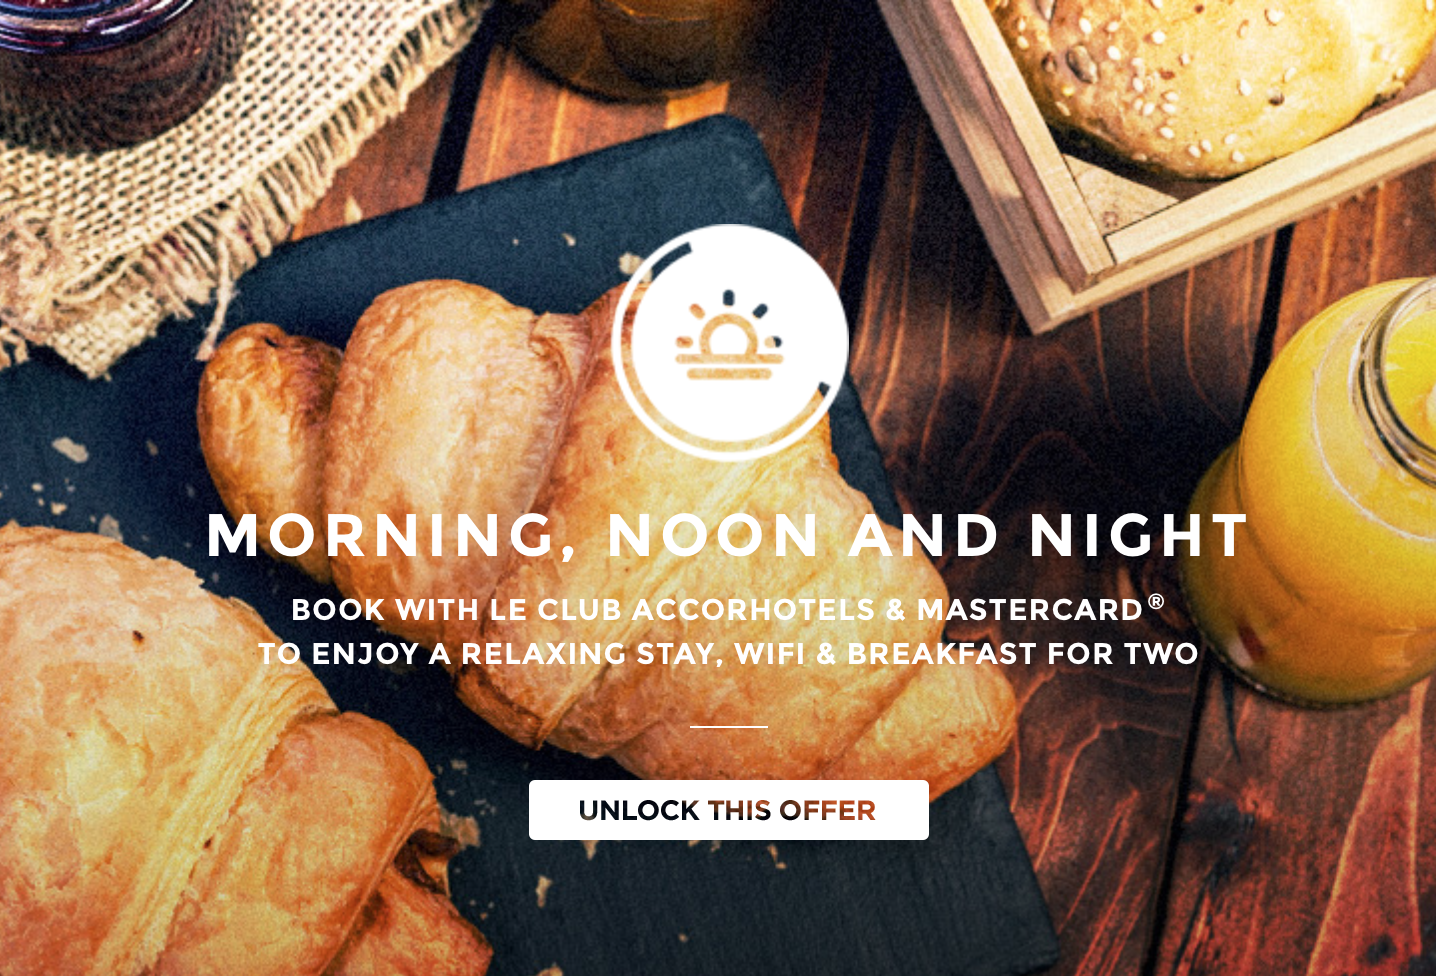 Morning, Noon and Night promotion AccorHotels